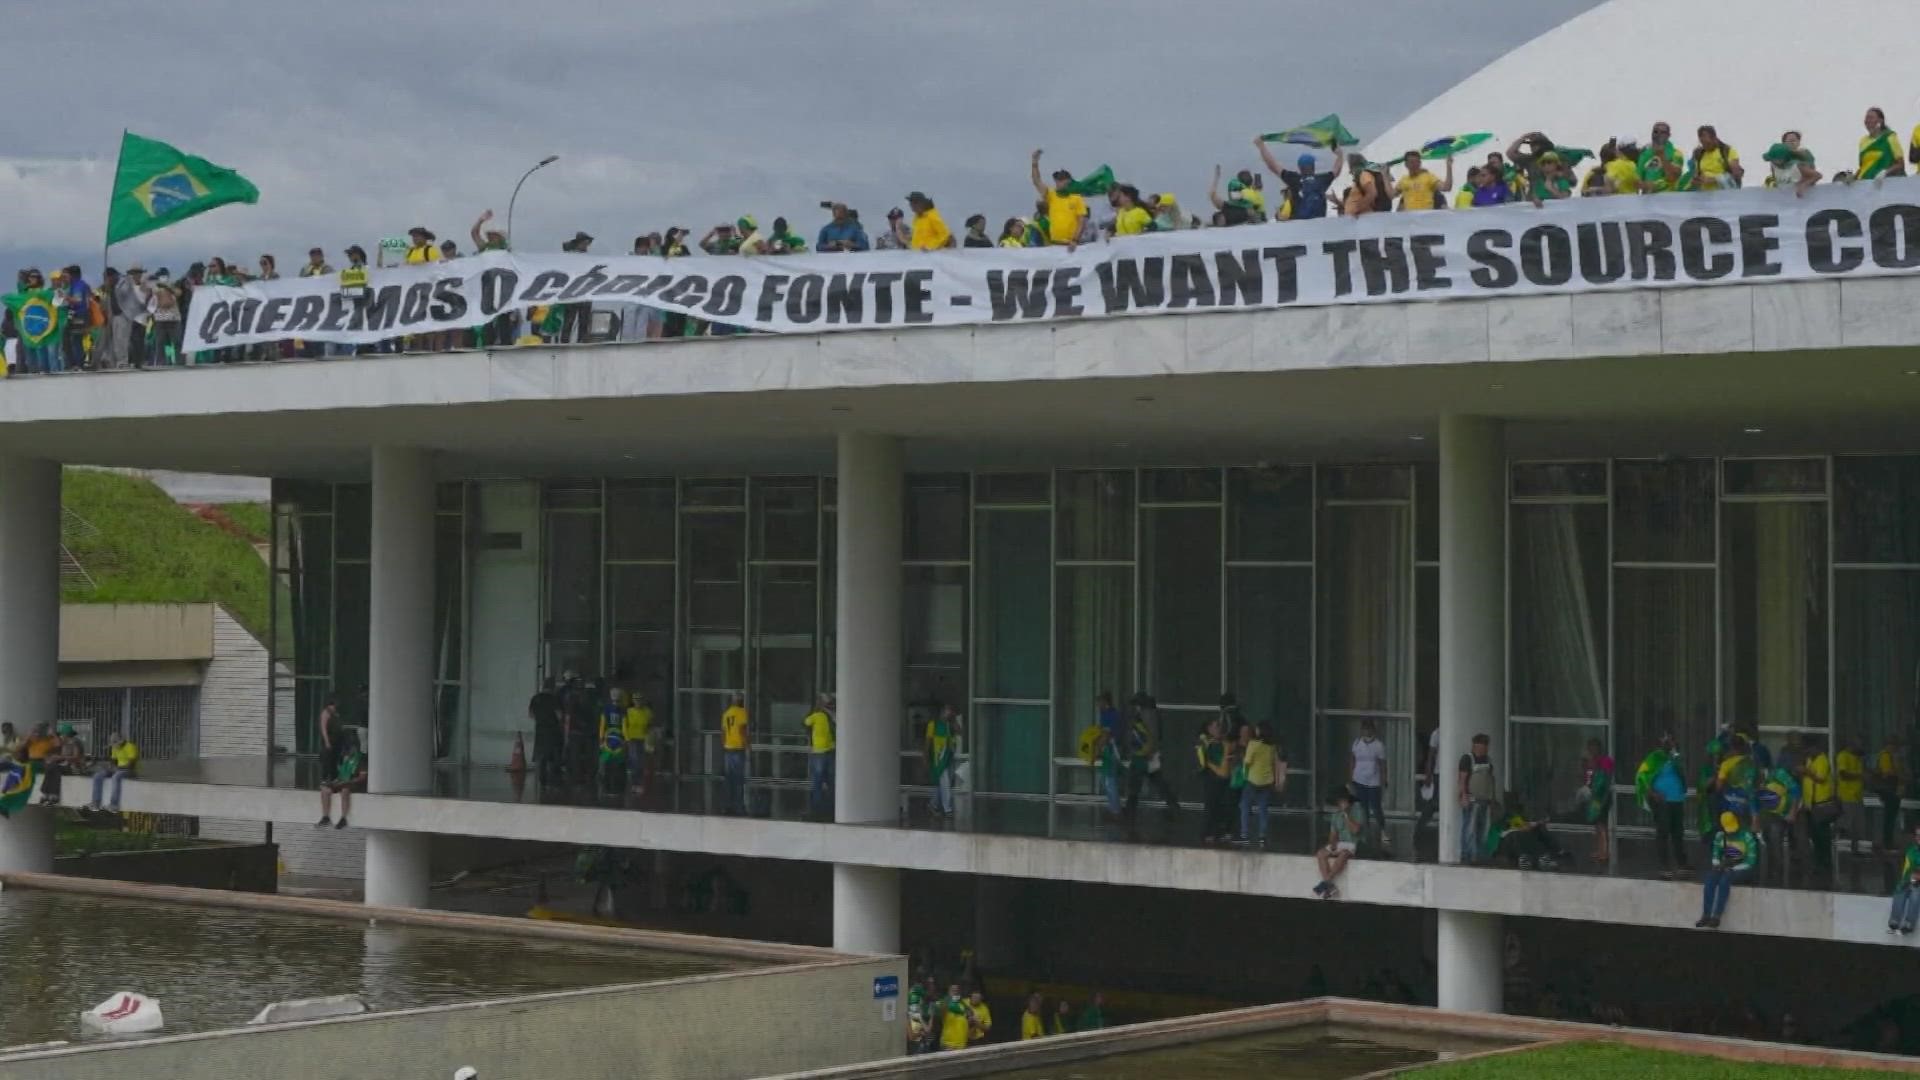 Supporters of Bolsonaro stormed Brazilian government buildings in the aftermath of the country's presidential election, claiming the results were rigged.